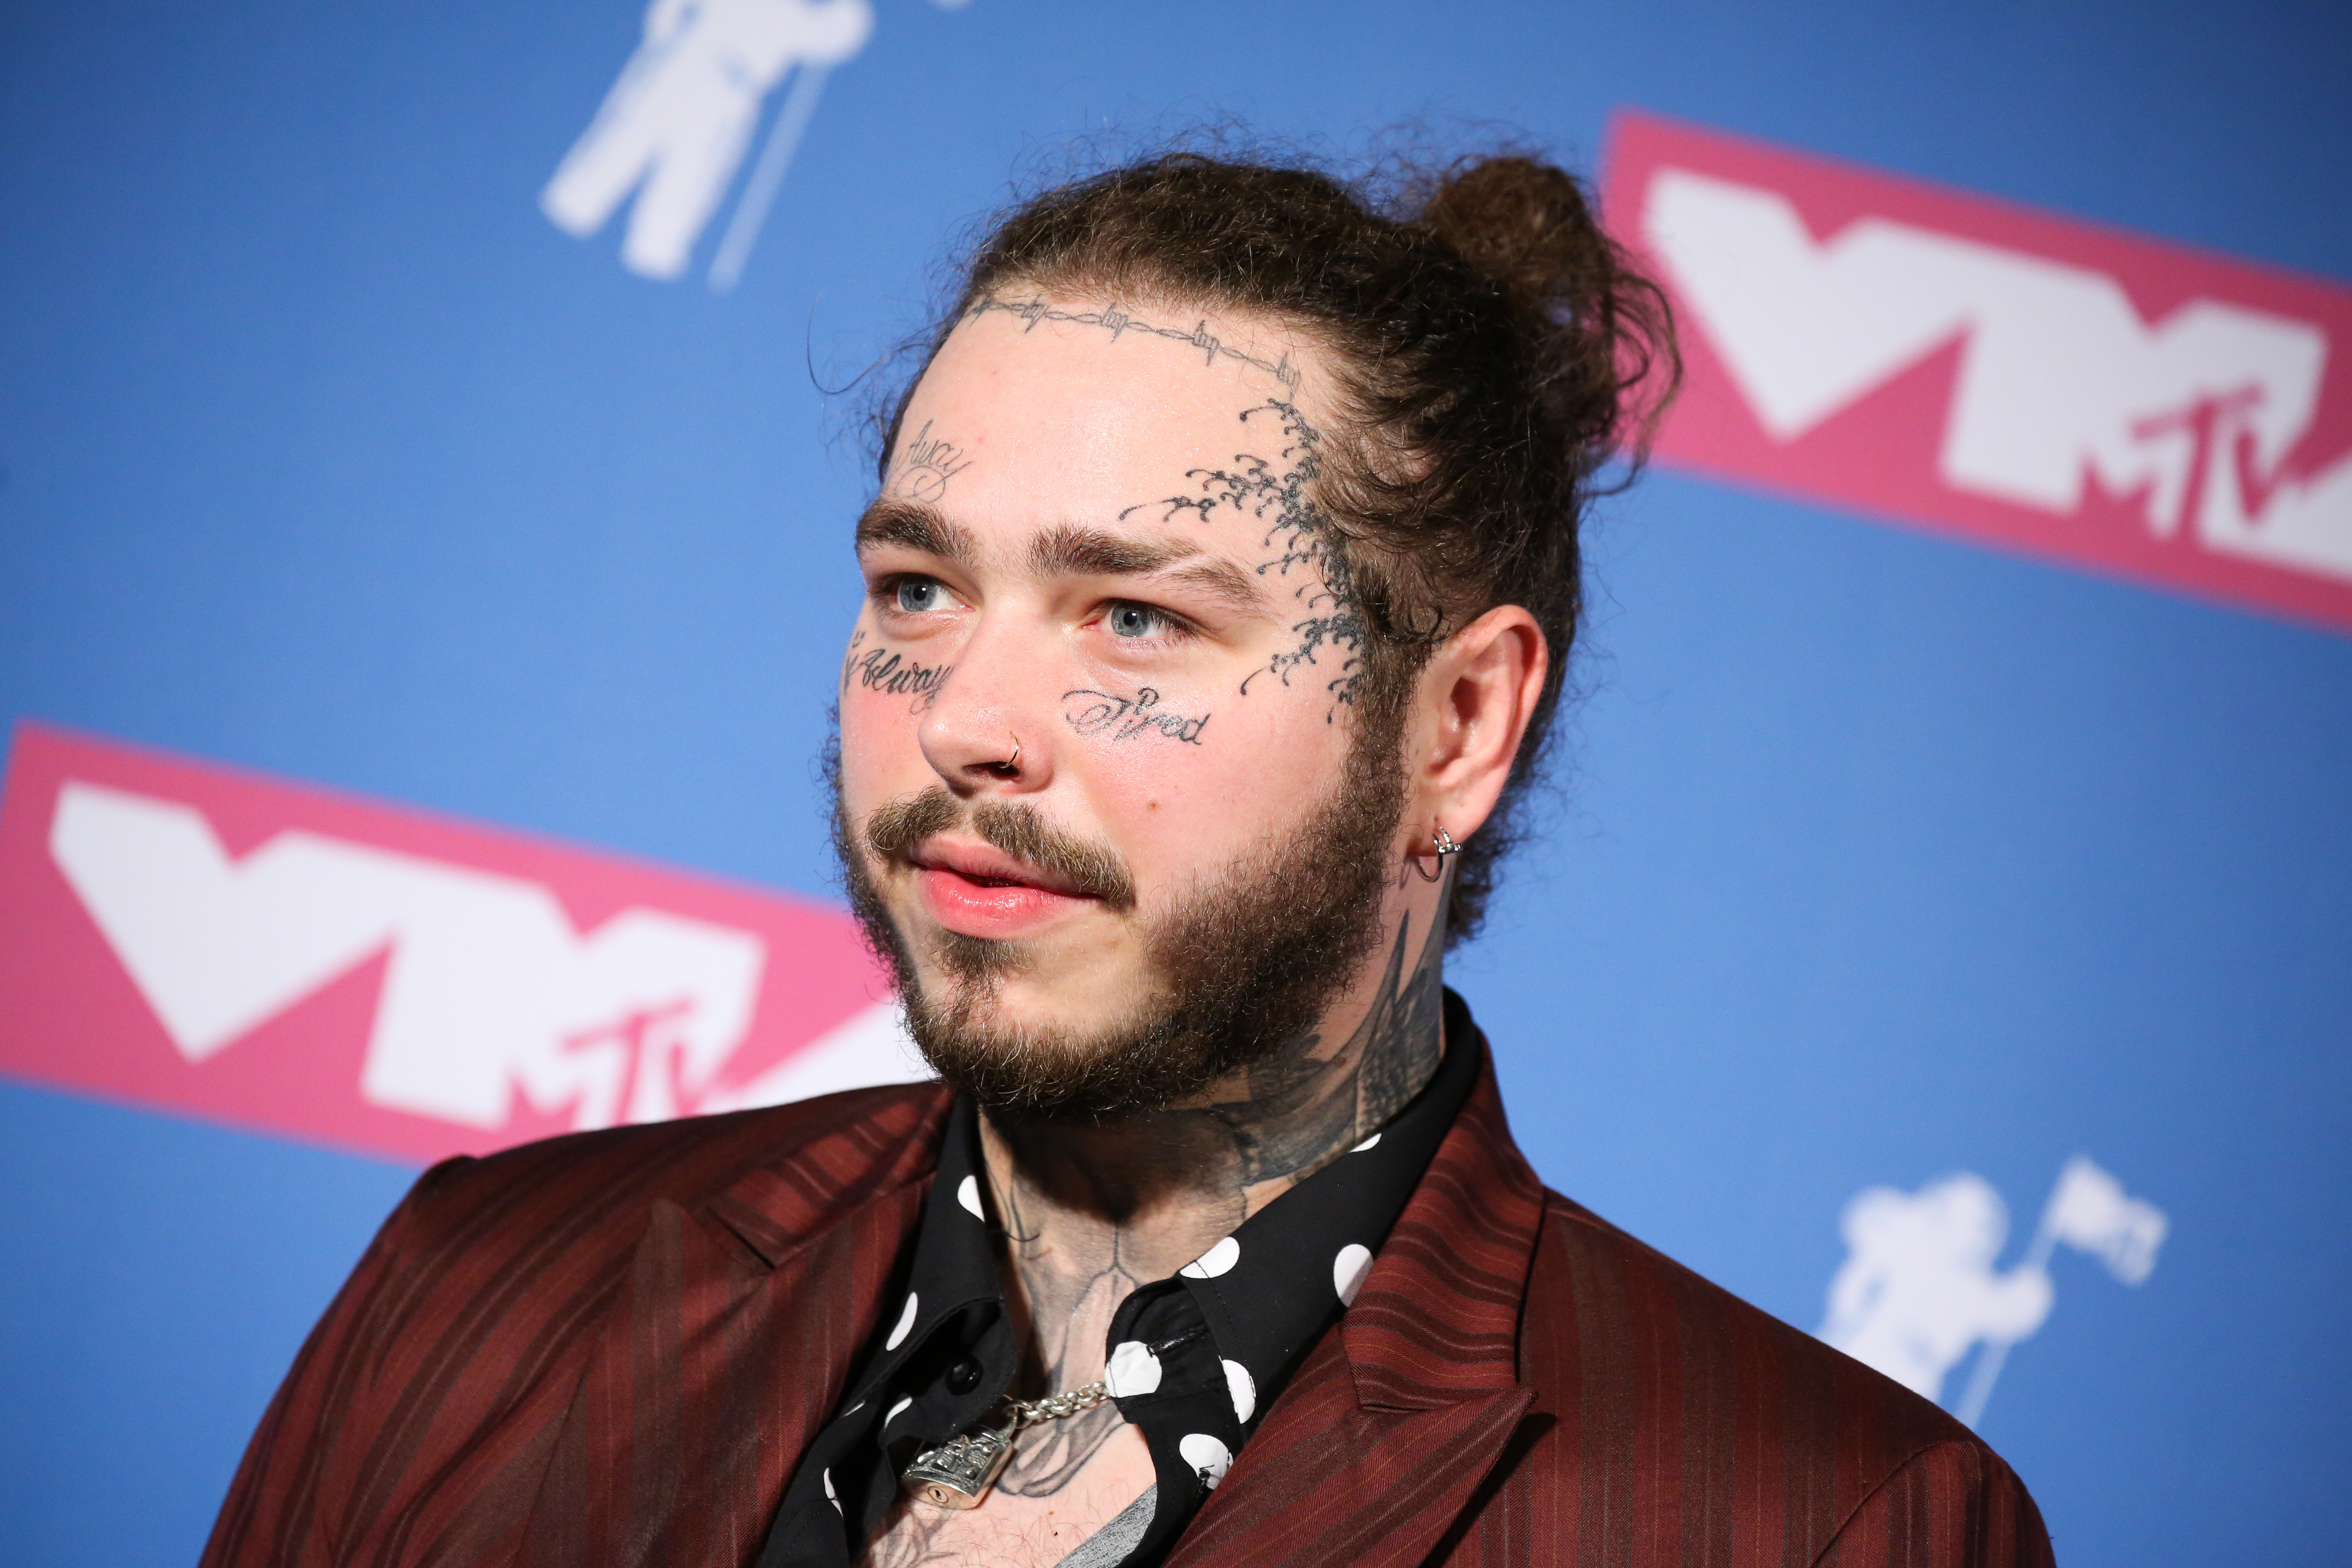 These Celebrities All Have Face Tattoos  Check Them Out  EG Extended  Slideshow Tattoo  Just Jared Celebrity News and Gossip  Entertainment